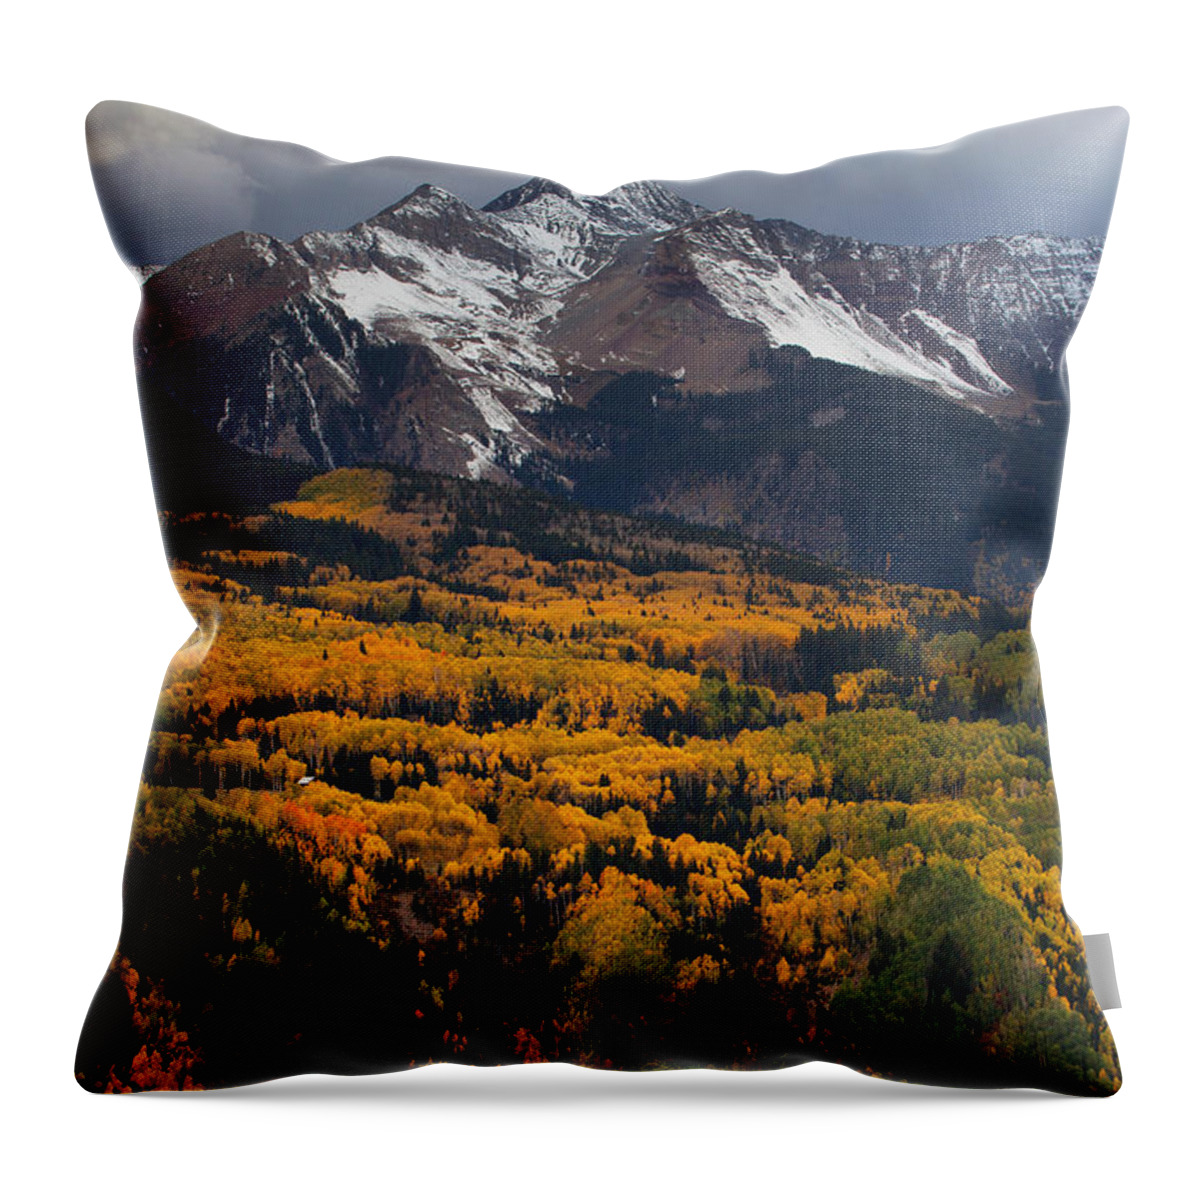 Colorado Landscapes Throw Pillow featuring the photograph Mountainous Storm by Darren White